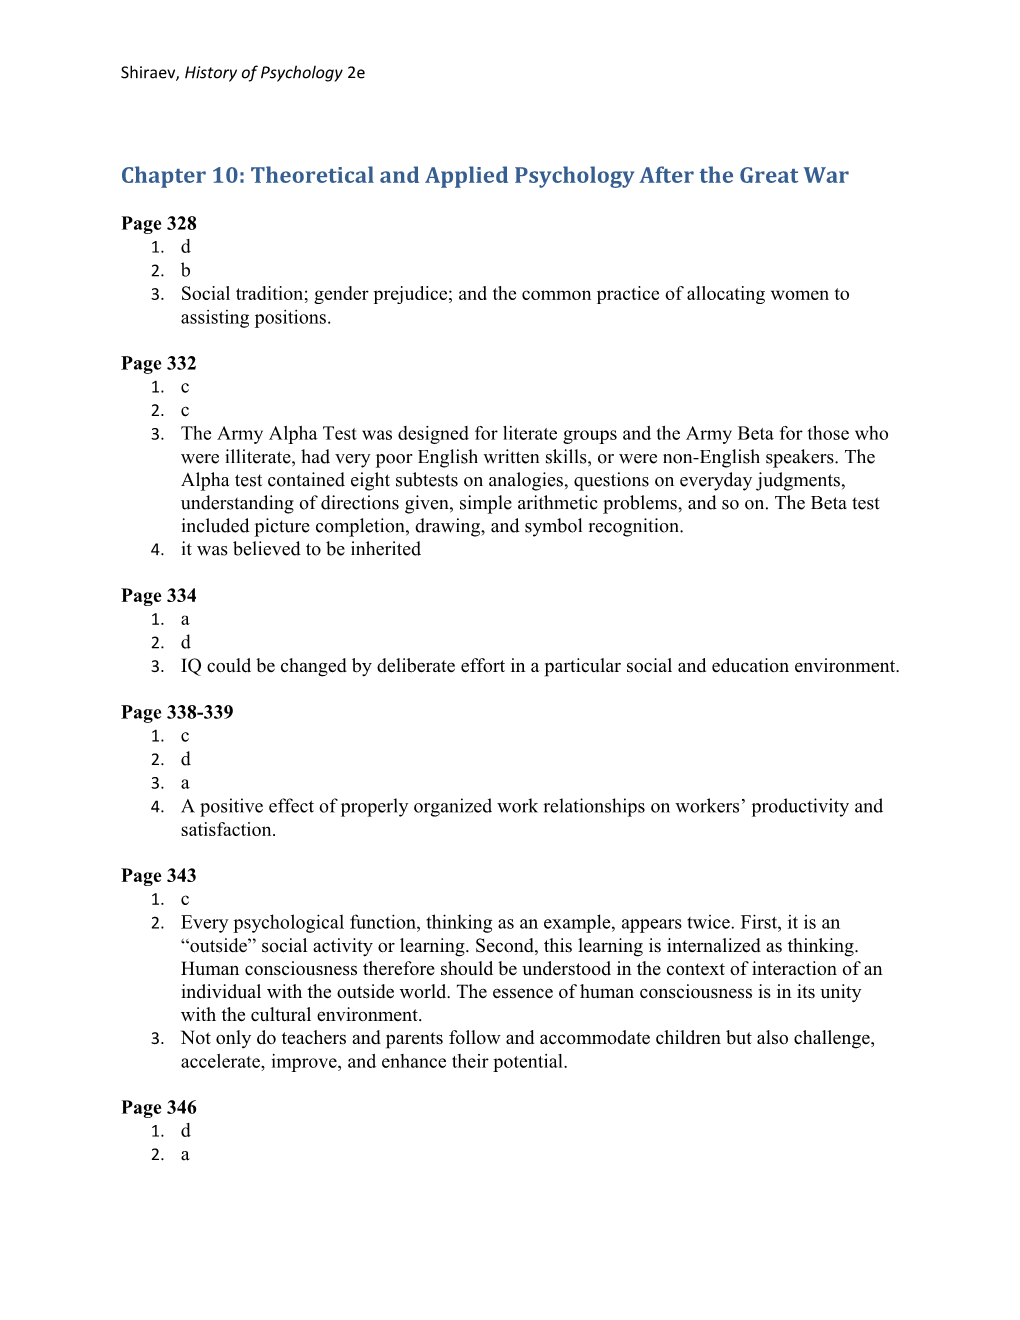 Chapter 10: Theoretical and Applied Psychology After the Great War